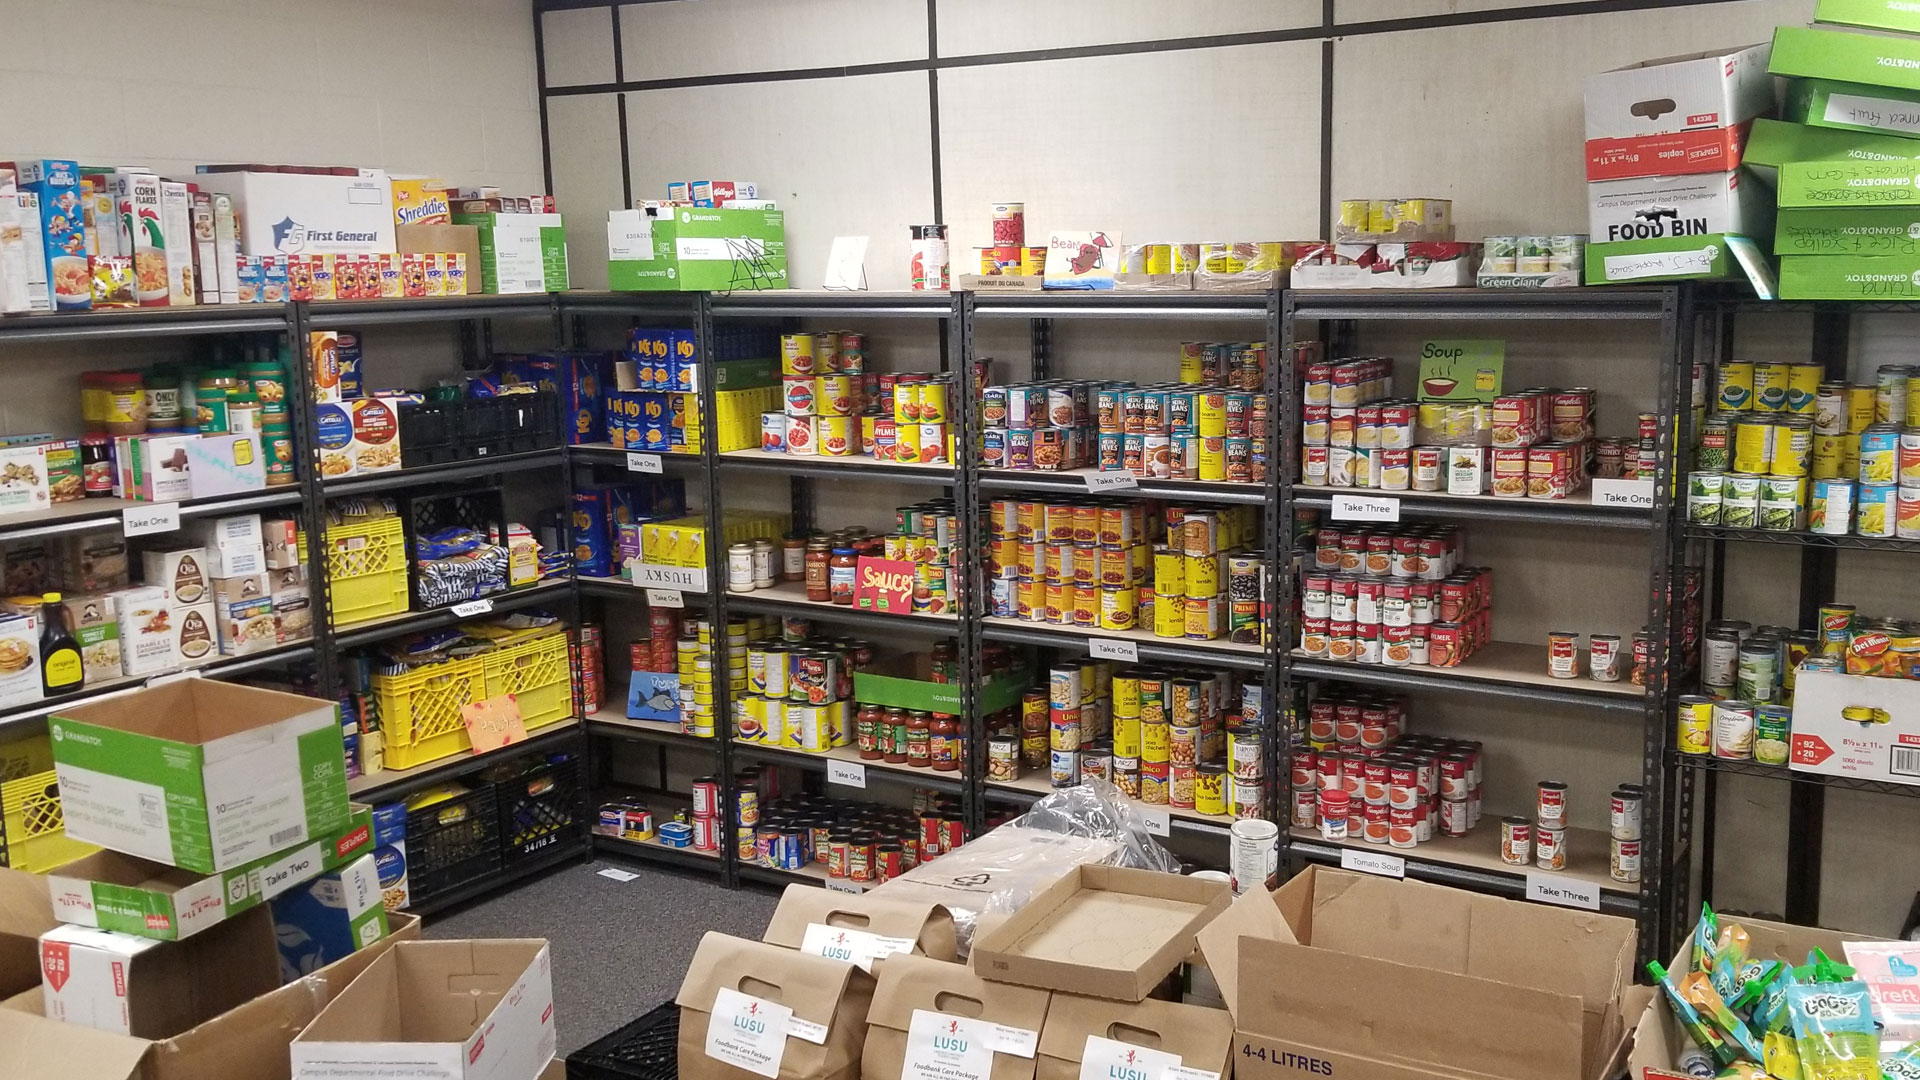 LUSU Food Resource Centre shelves stocked full of non perishable food items.